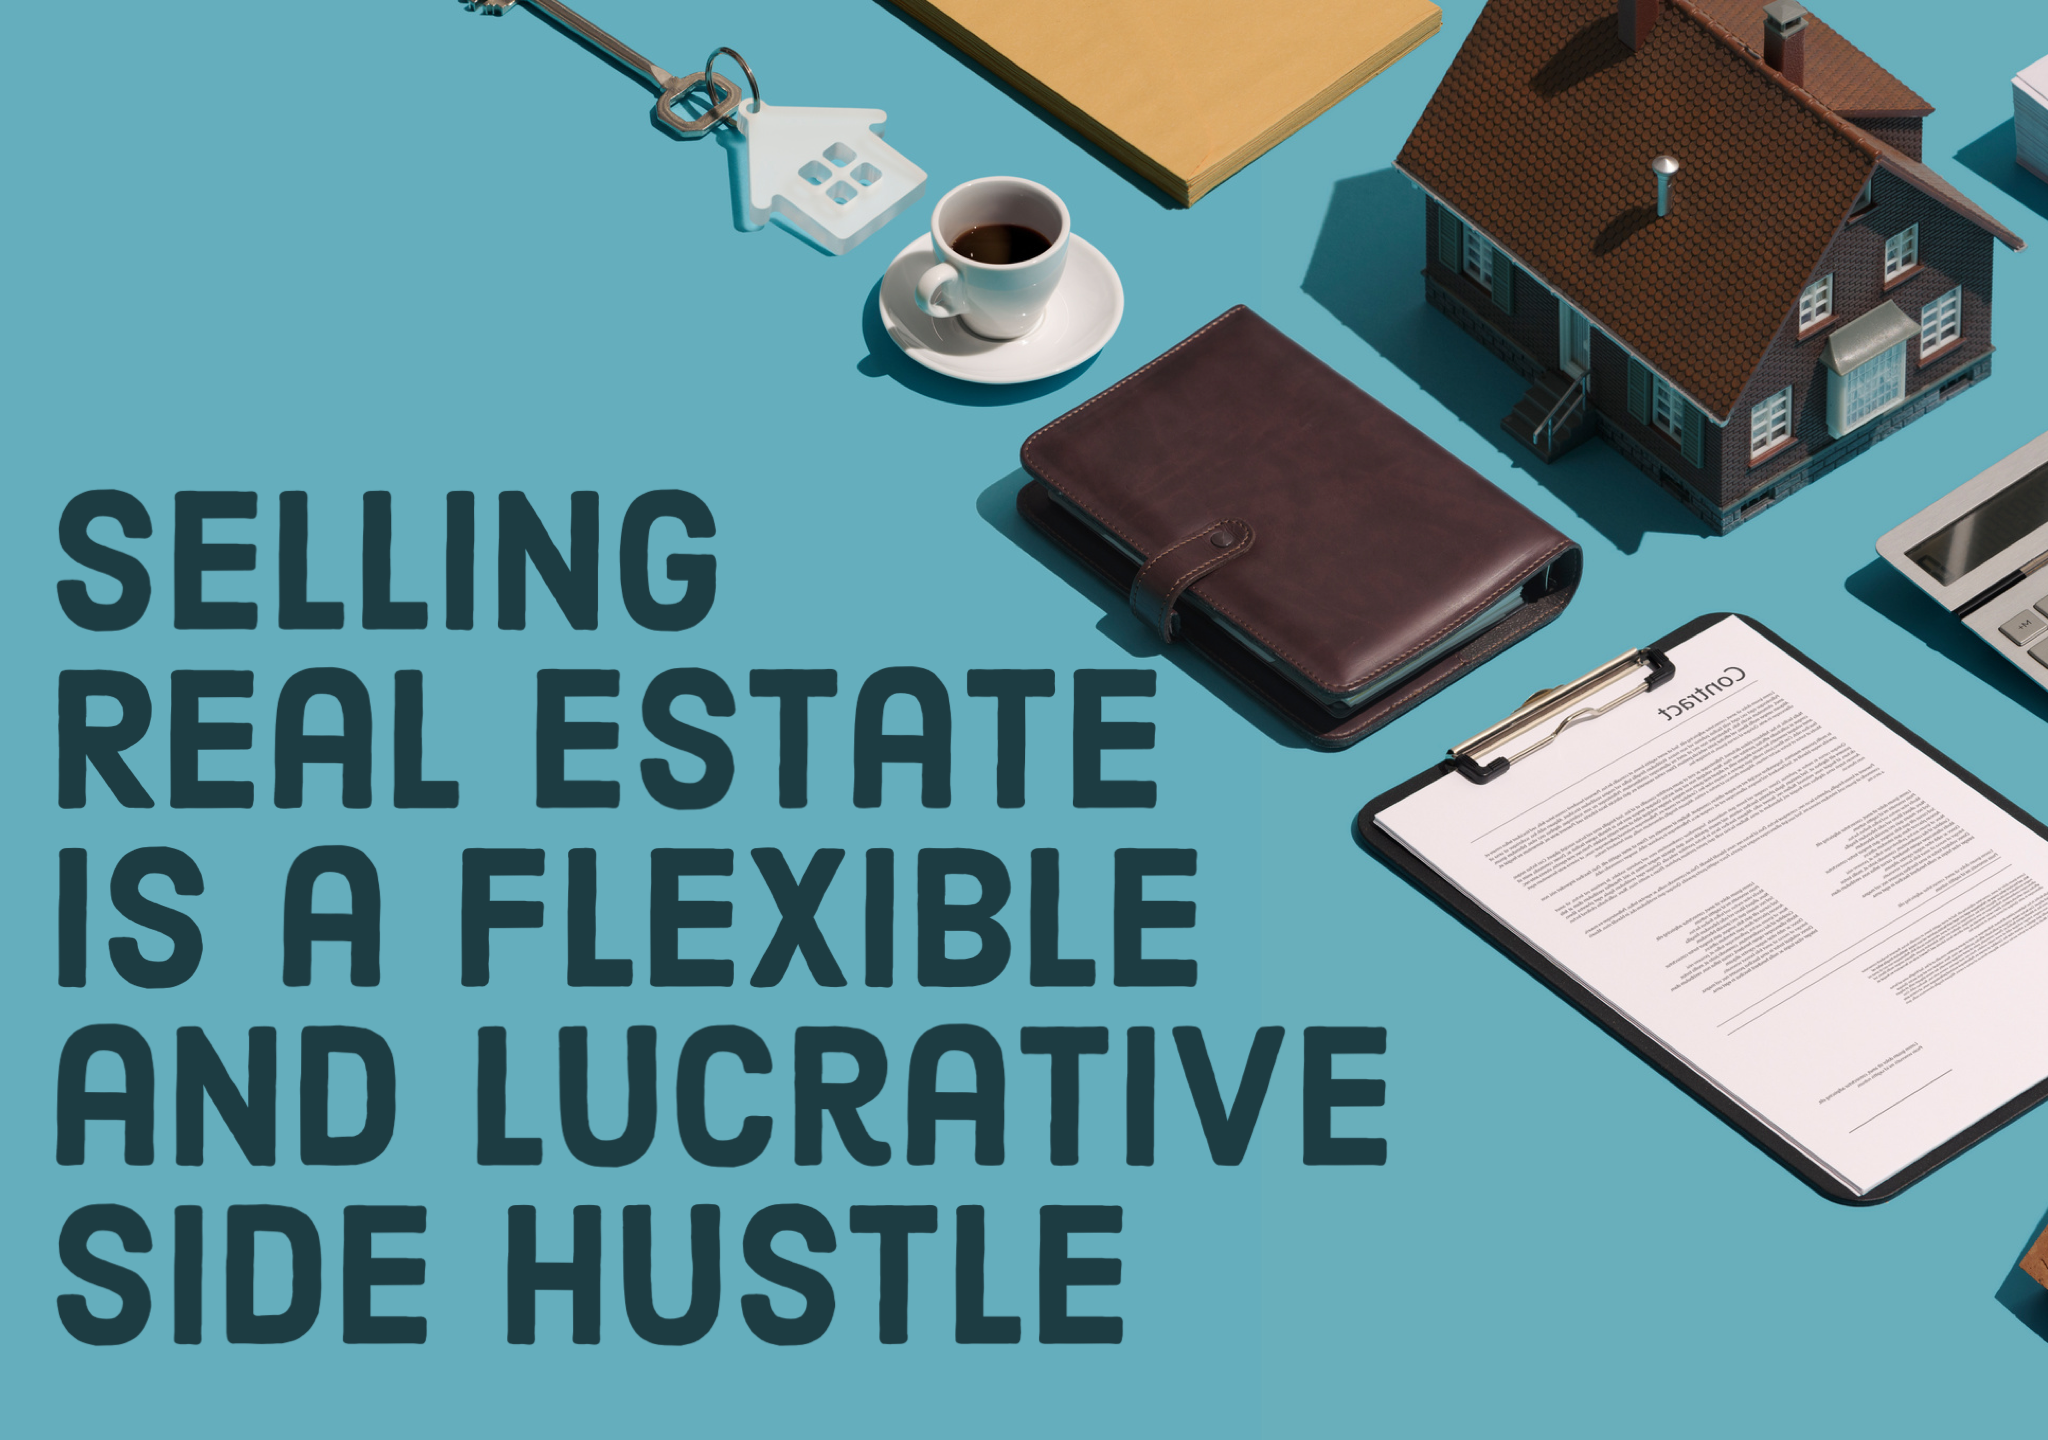 Selling Real Estate is a Flexible and Lucrative Side Hustle